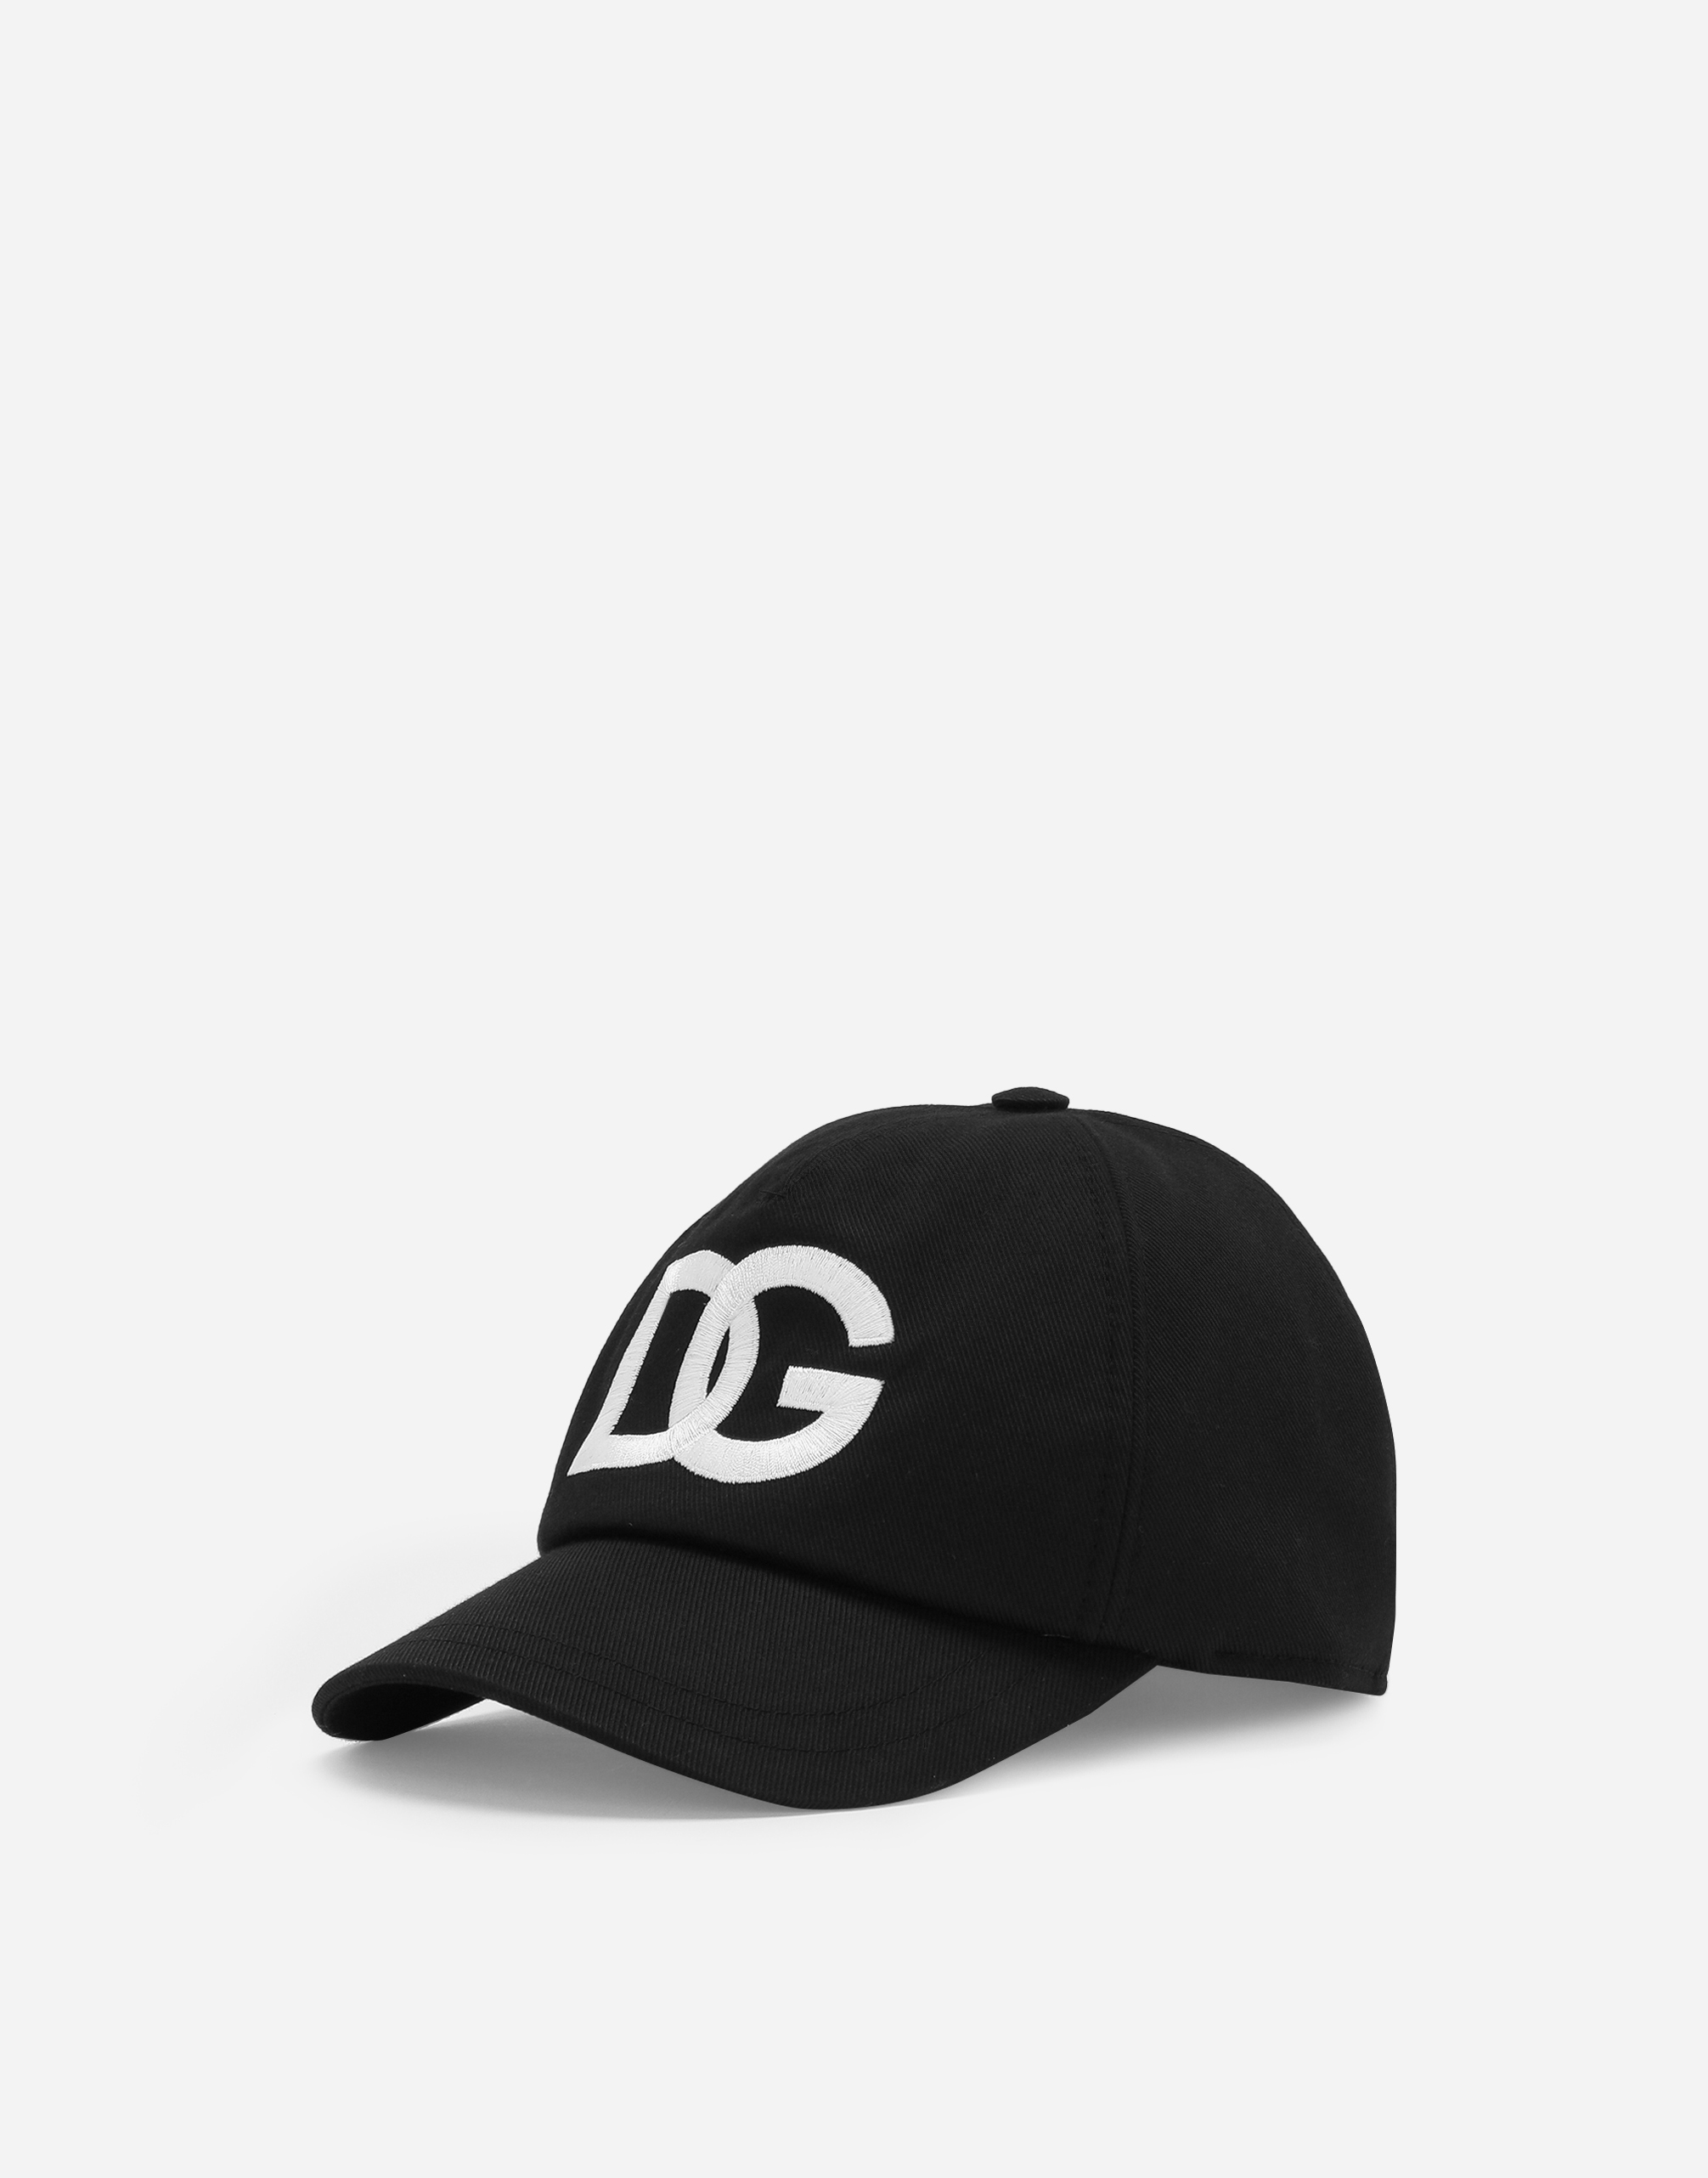 Baseball cap with DG logo patch in Black